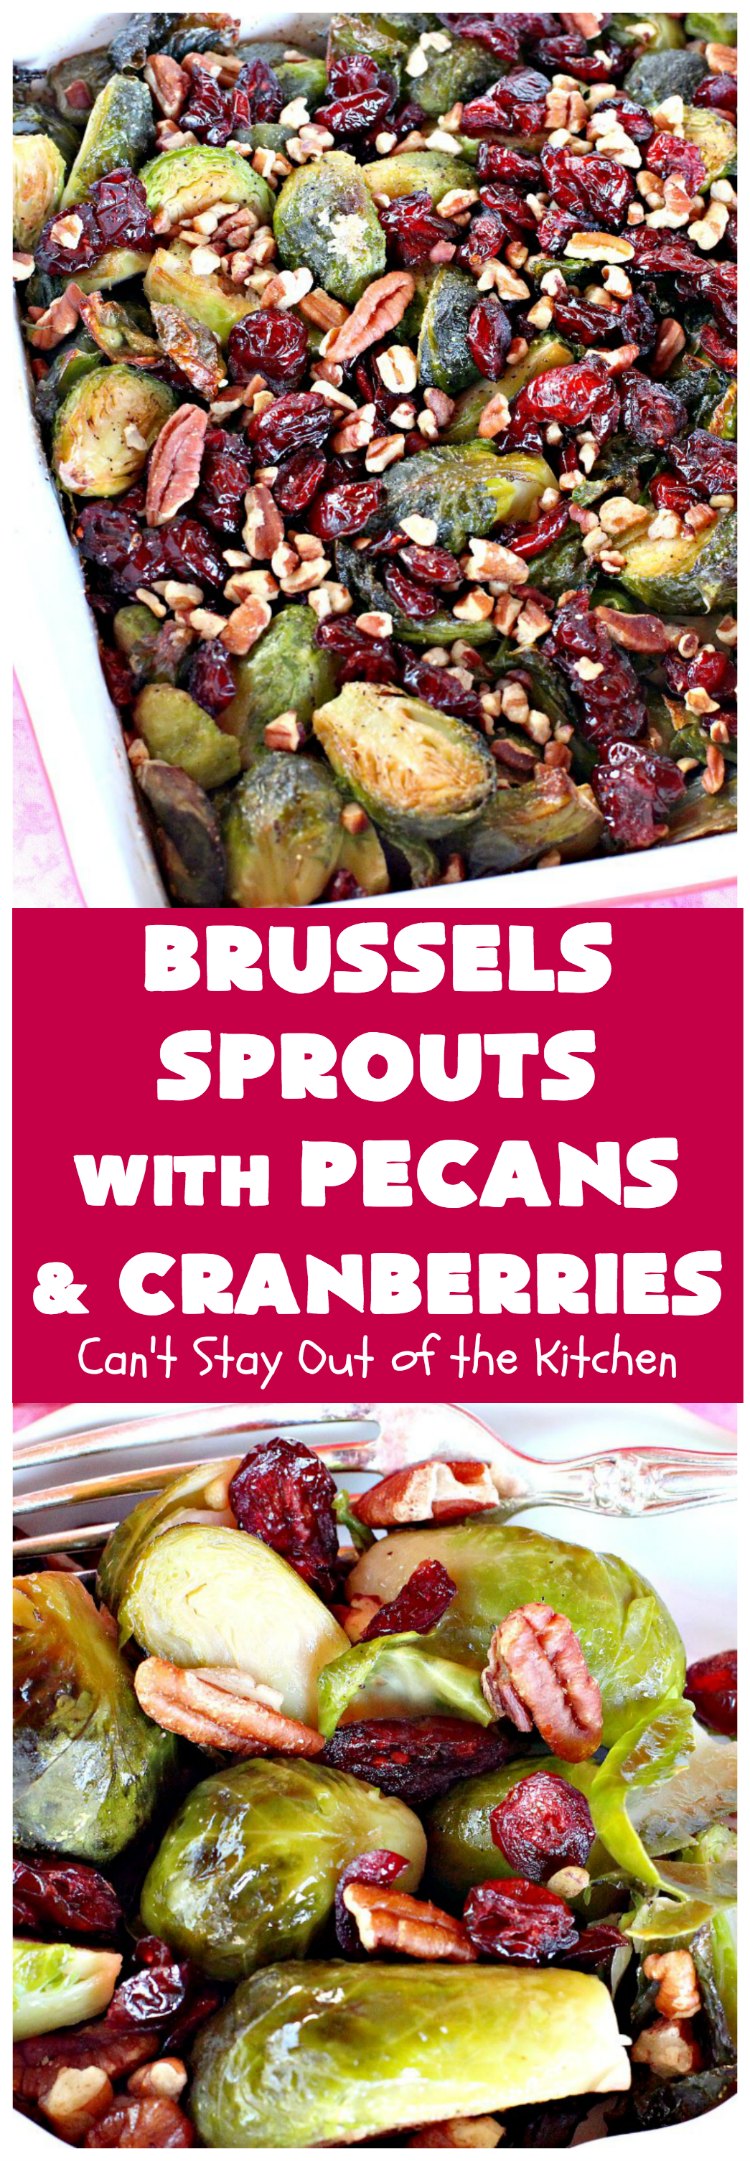 Brussels Sprouts with Pecans and Cranberries | Can't Stay Out of the Kitchen | this spectacular side dish is perfect for #FathersDay & other #holiday menus. It's crunchy and delicious without being bitter. #brusselssprouts #craisins #glutenfree #vegan